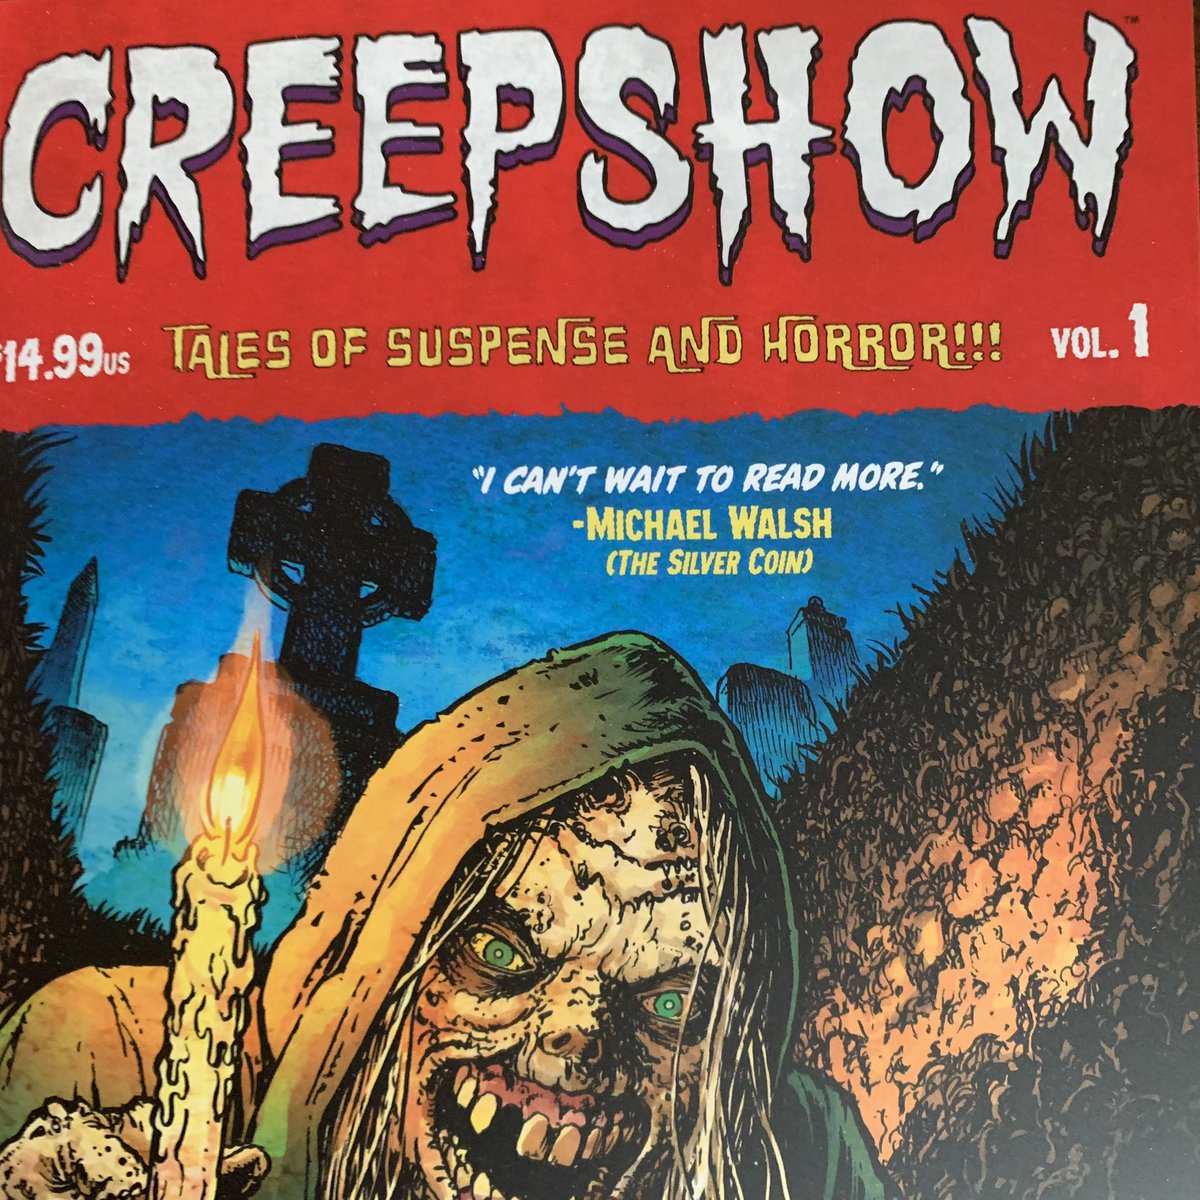 Creepshow vol 1 went to a second printing? It’s the first time @Fran_Galan_art and I worked together and it was magic out the gate? From @Skybound